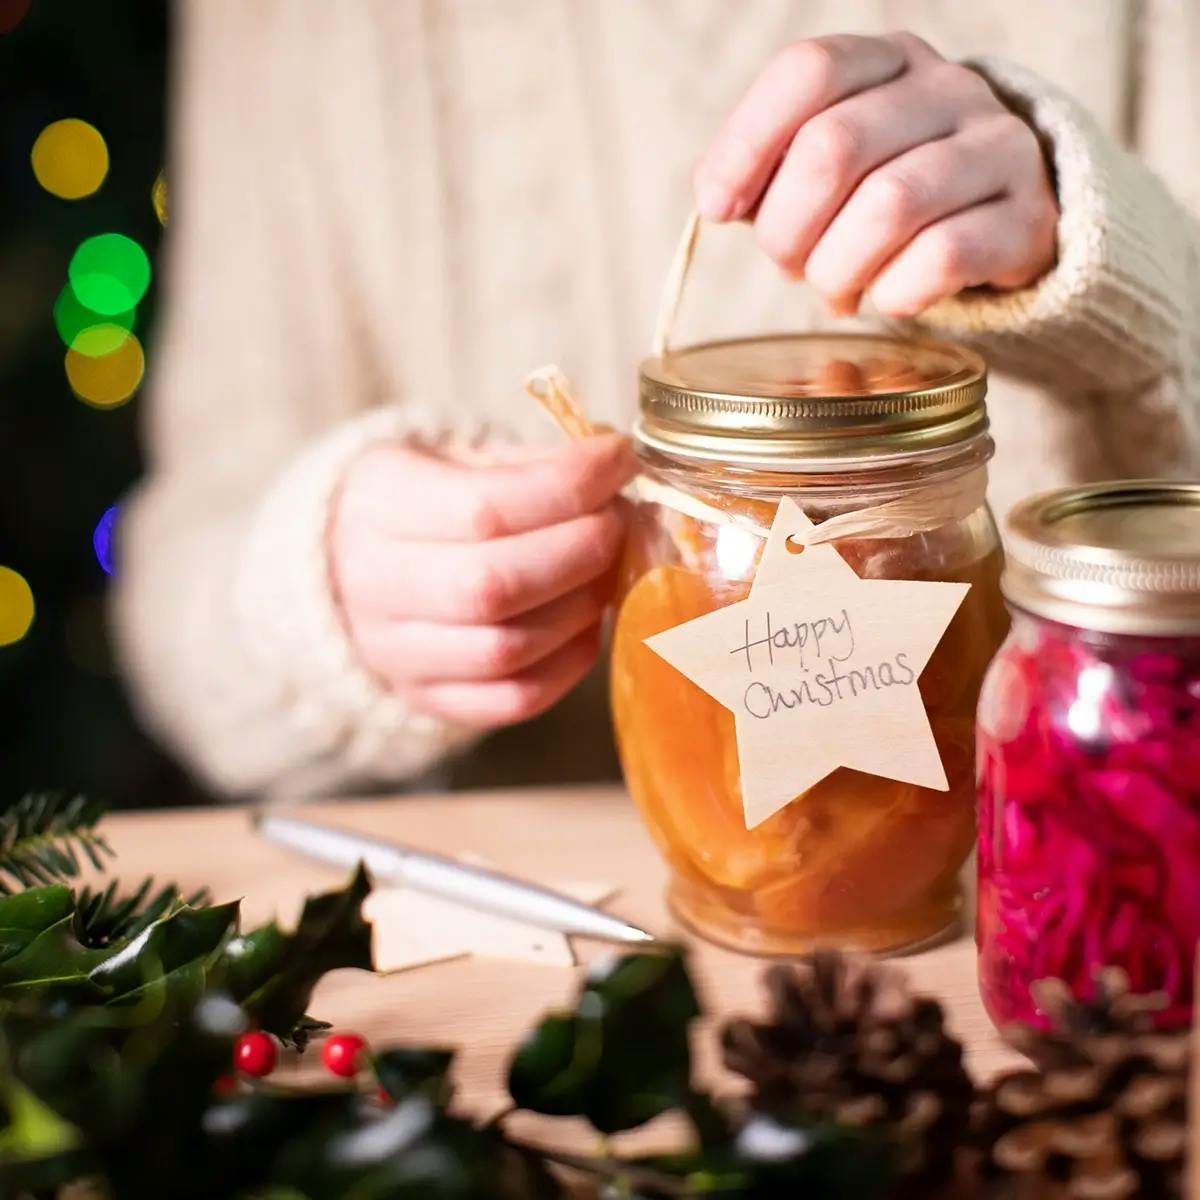 Hands tying a reusable wooden gift tag on homemade jars of preserves for a handmade Christmas gift on a budget.